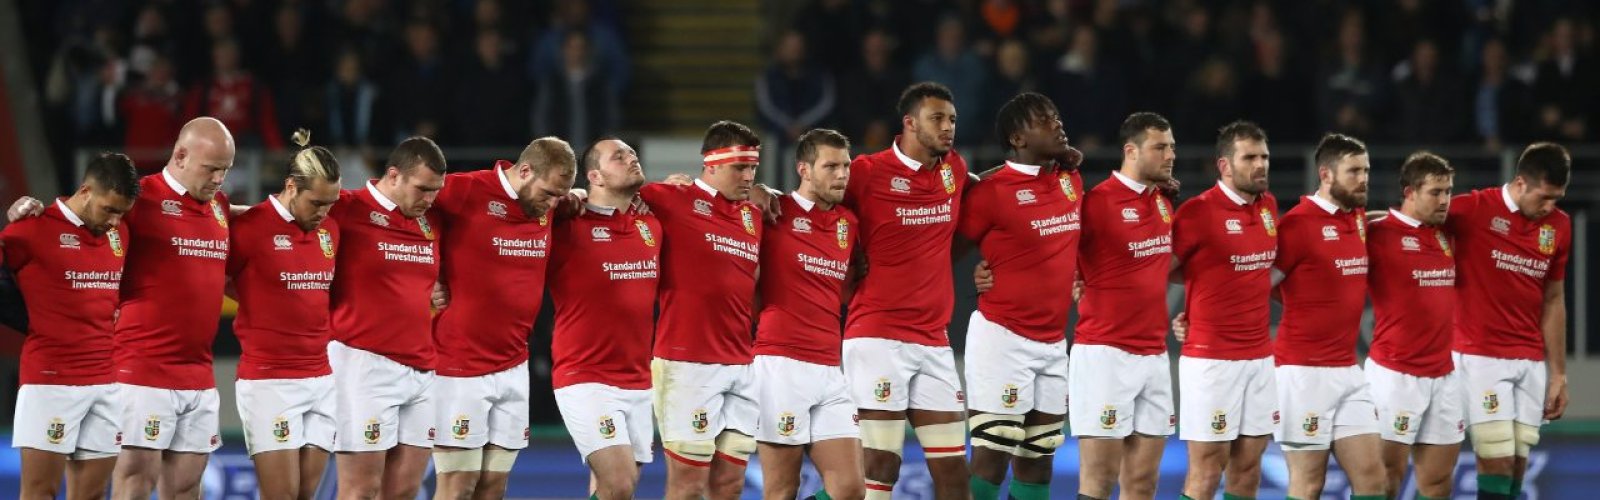 Lions Tour 2025 ticket packages to watch Test matches in Australia image